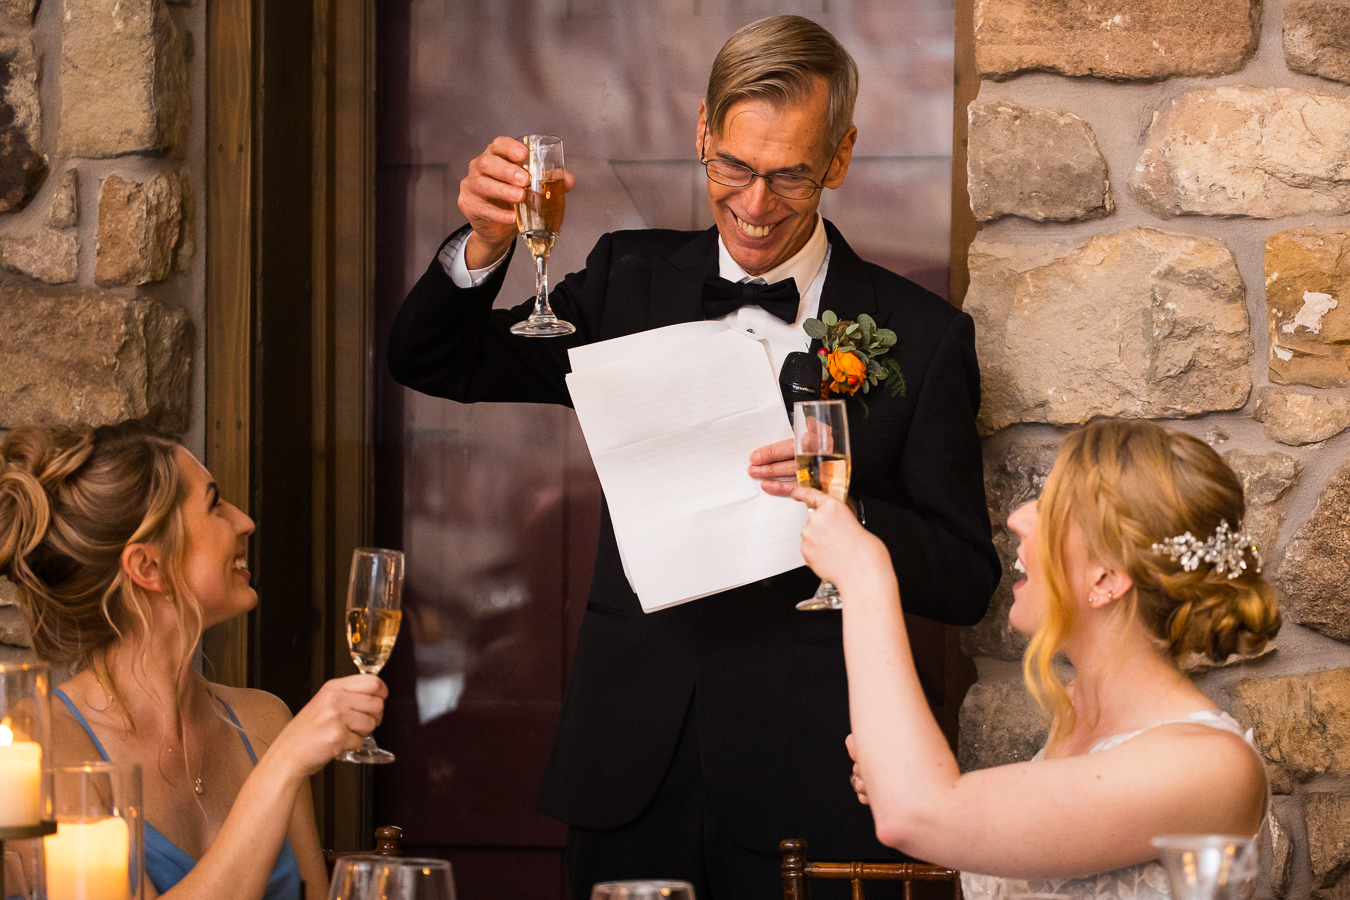 candid image of the brides father as he shares his speech and toasts during the wedding traditions portion of the reception